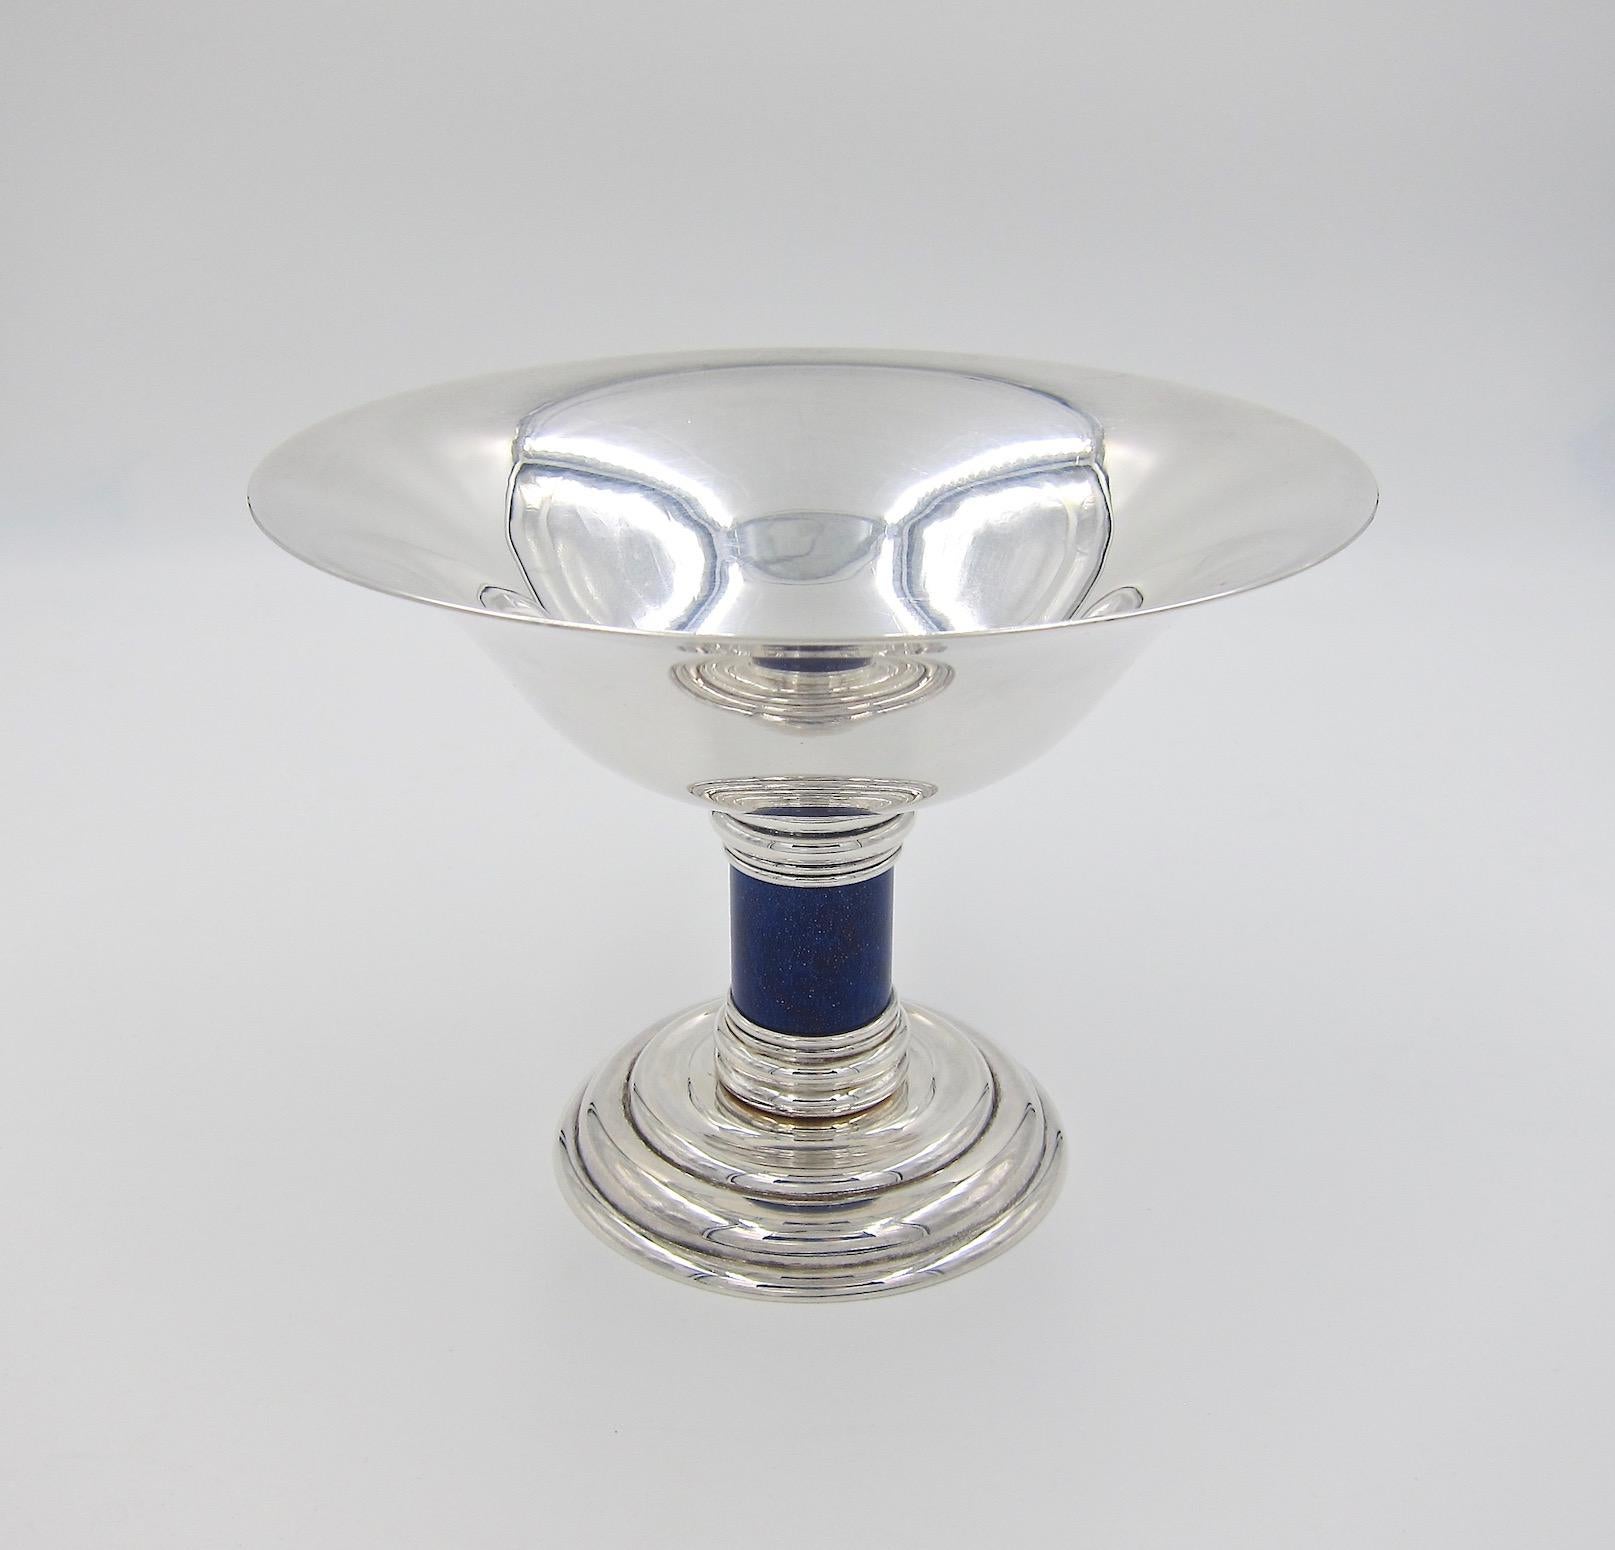 A large and elegant Art Deco compote designed by Jean E. Puiforcat (1897-1945) in the 1930s for renowned silversmiths Puiforcat of Paris; the firm produced the form for several decades during the 20th century. The piece resembles an oversized